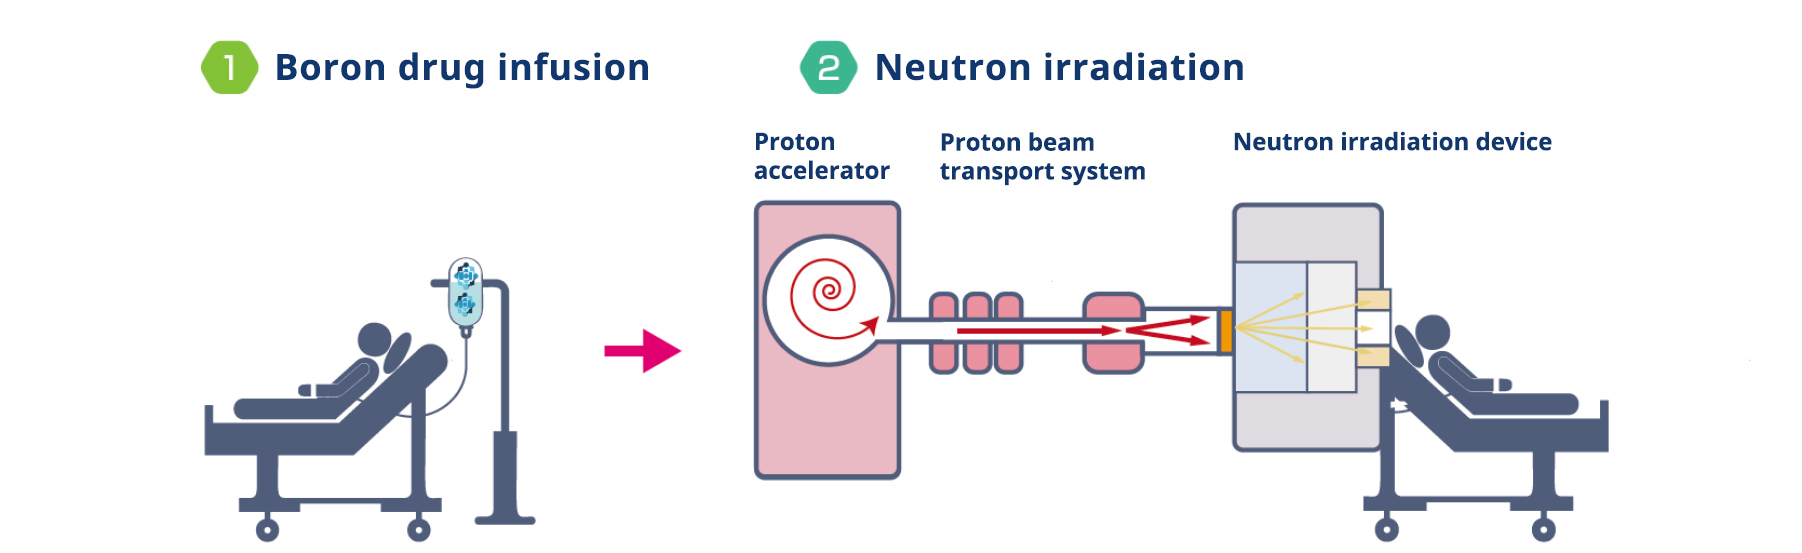 Outline of BNCT and image of irradiation